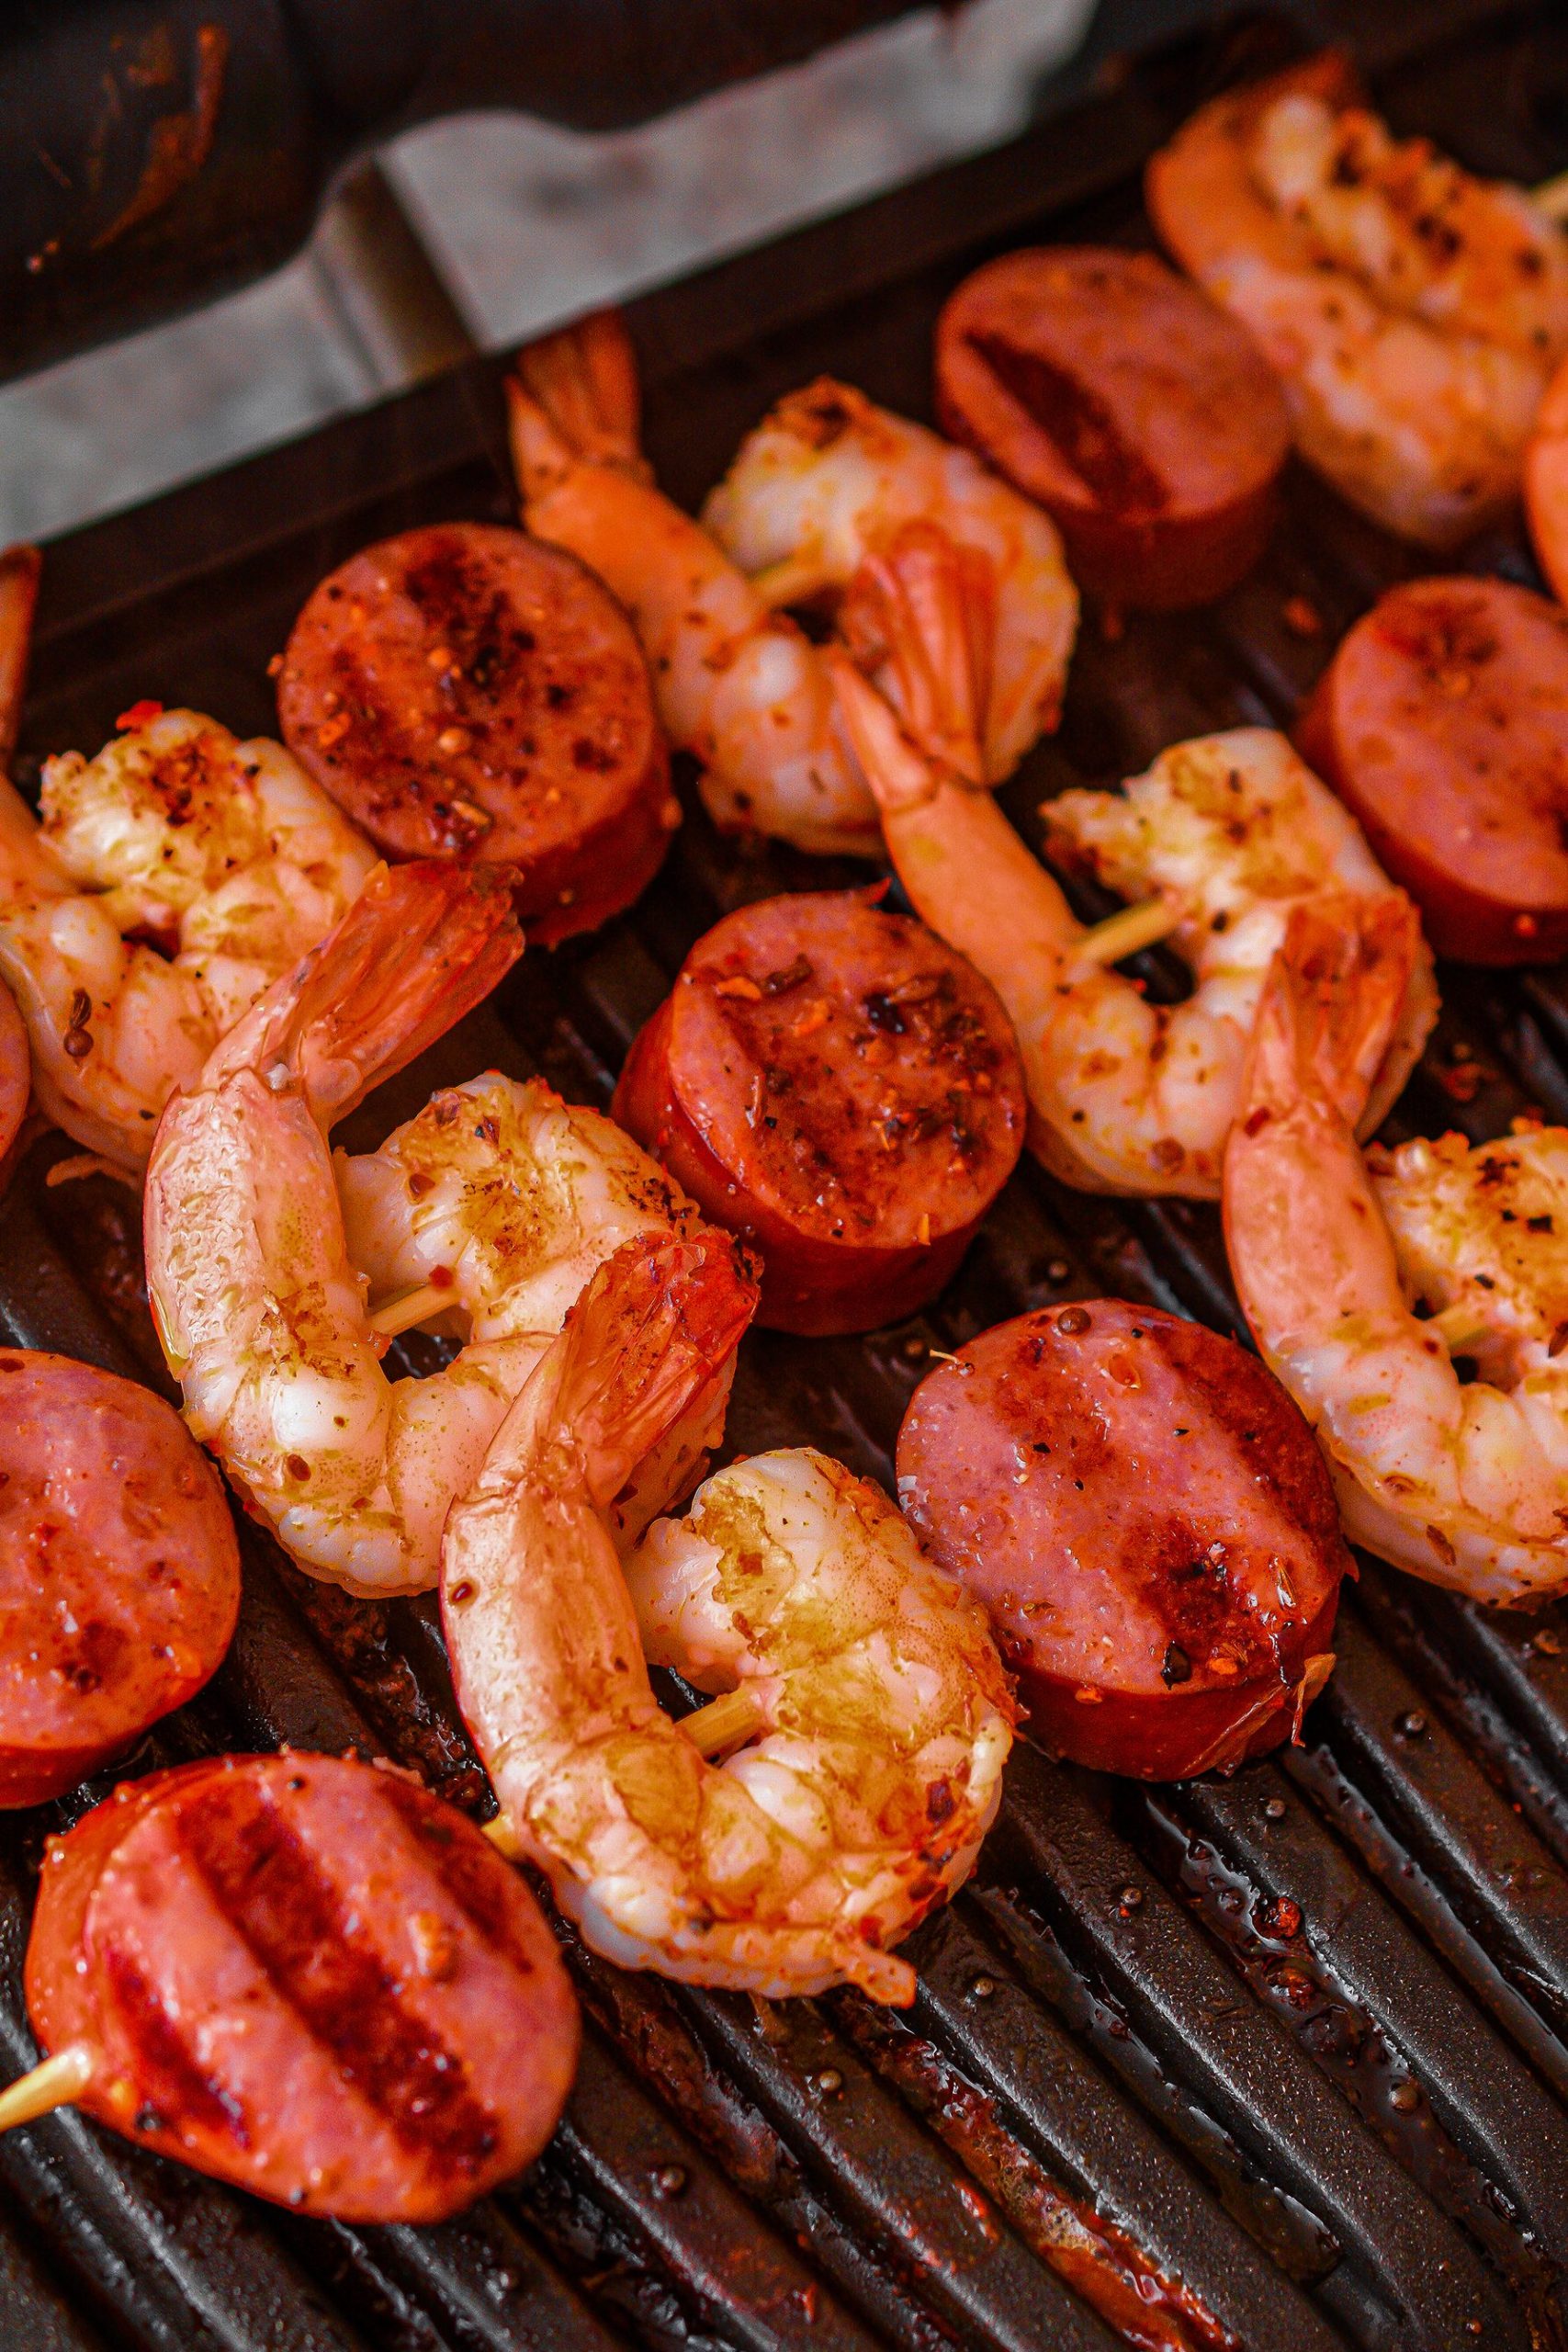 Grill the skewers for 3-5 minutes per side until done to your liking.